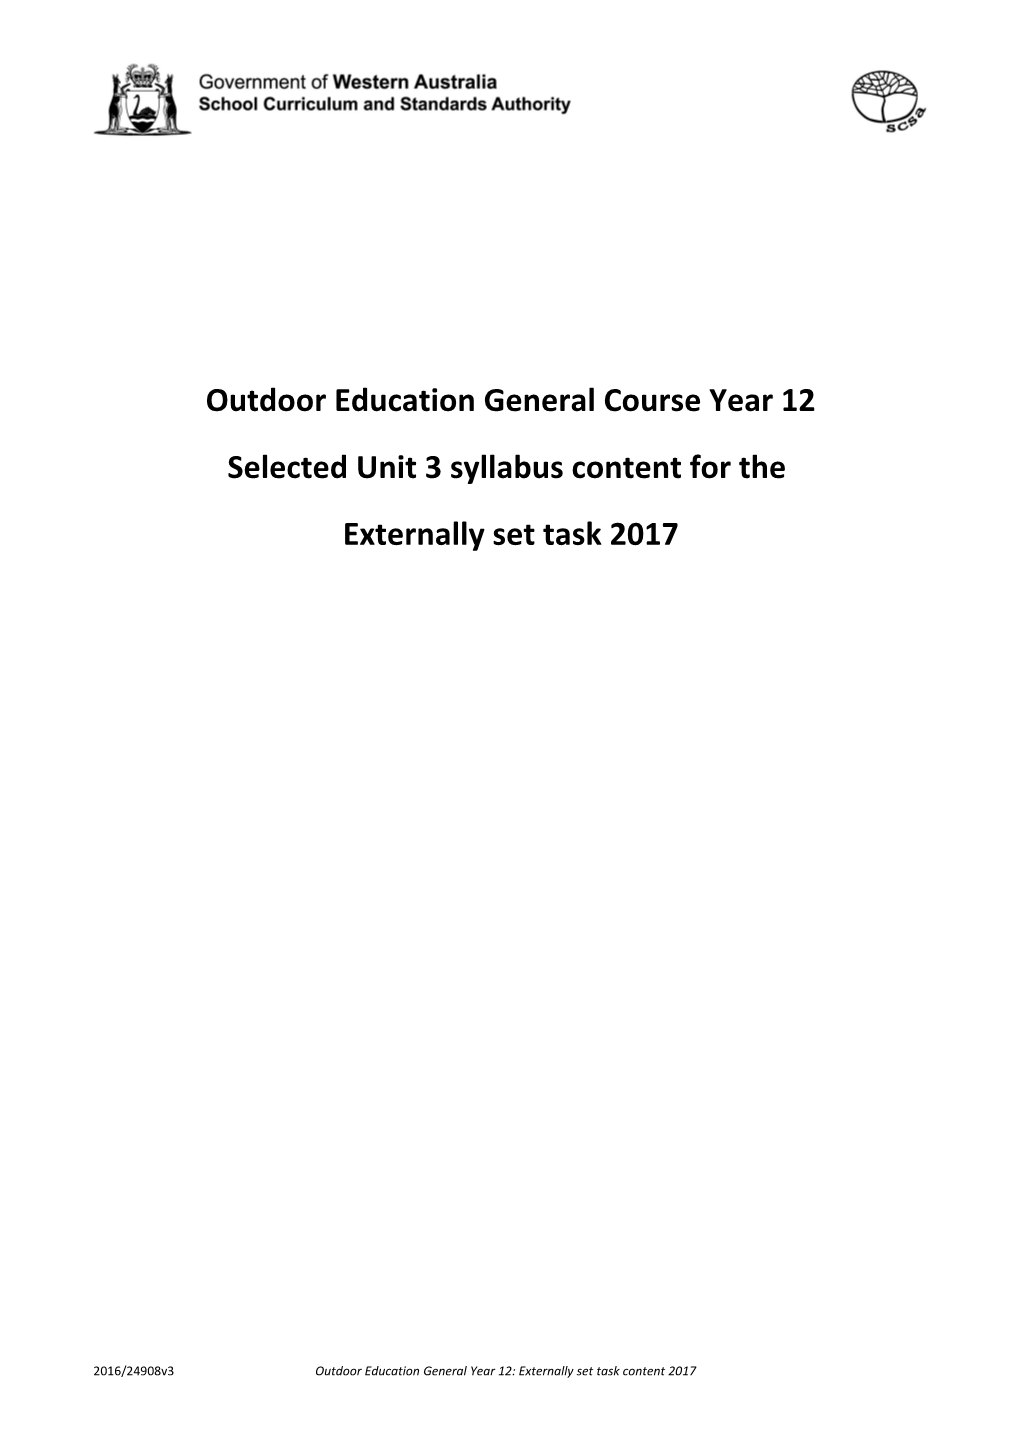 Outdoor Education General Course Year 12